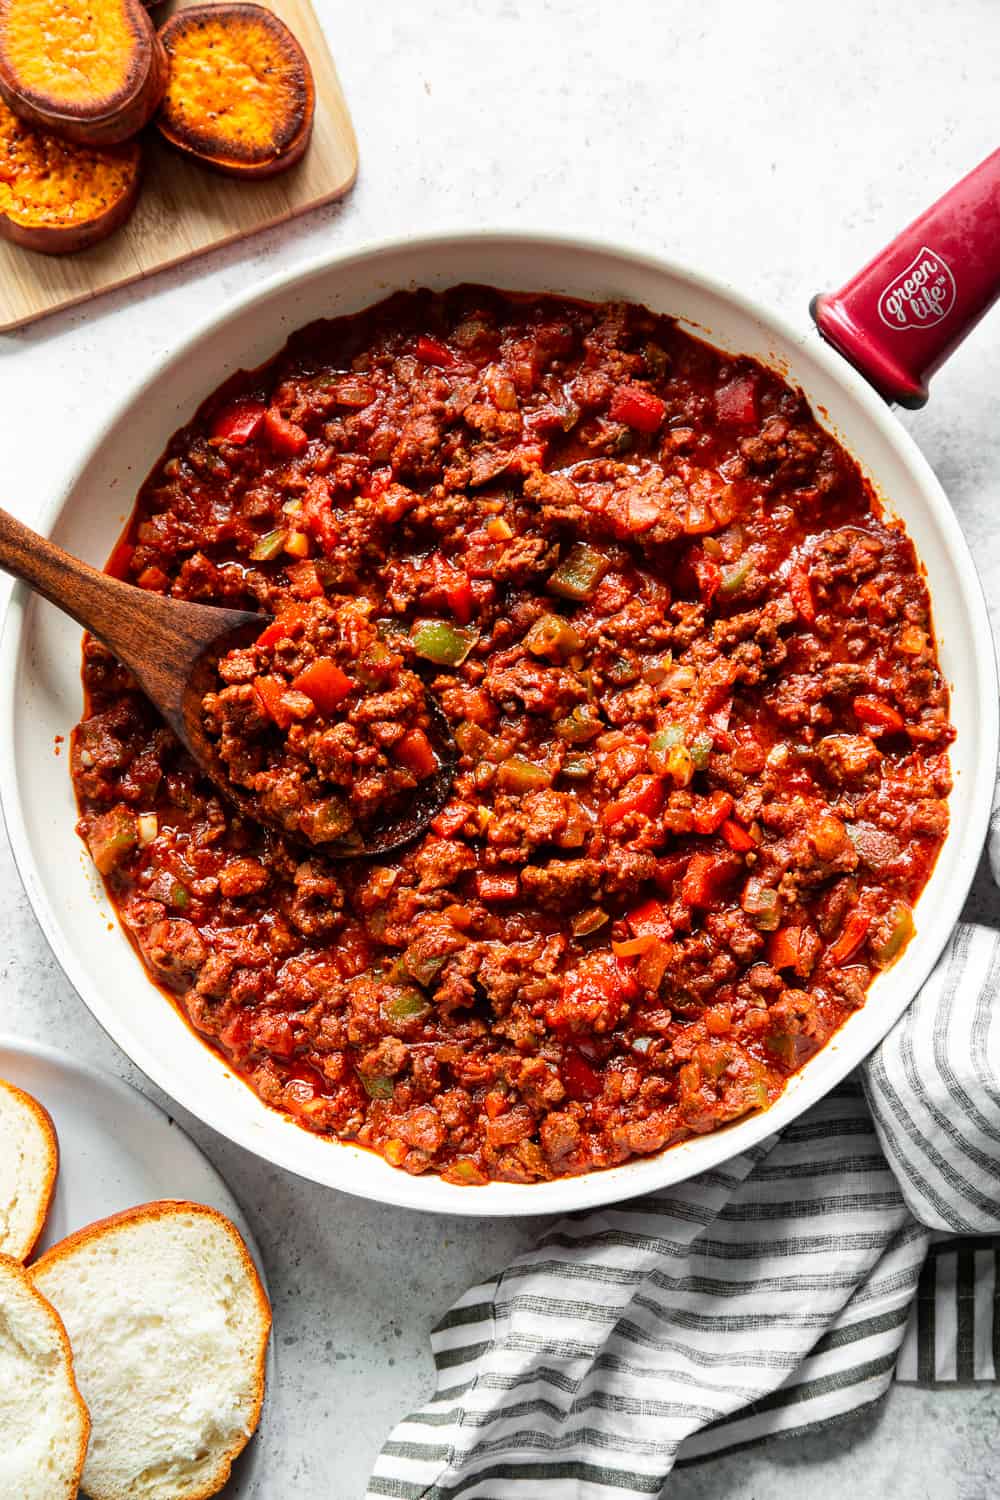 hese Paleo sloppy joes are classic comfort food made without the junk! The sauce is date sweetened to make it Whole30, and it's quick and easy enough for weeknight dinners.  Family approved and makes great leftovers, too!  Serve on paleo rolls or on sweet potato "buns"! #paleo #cleaneating 